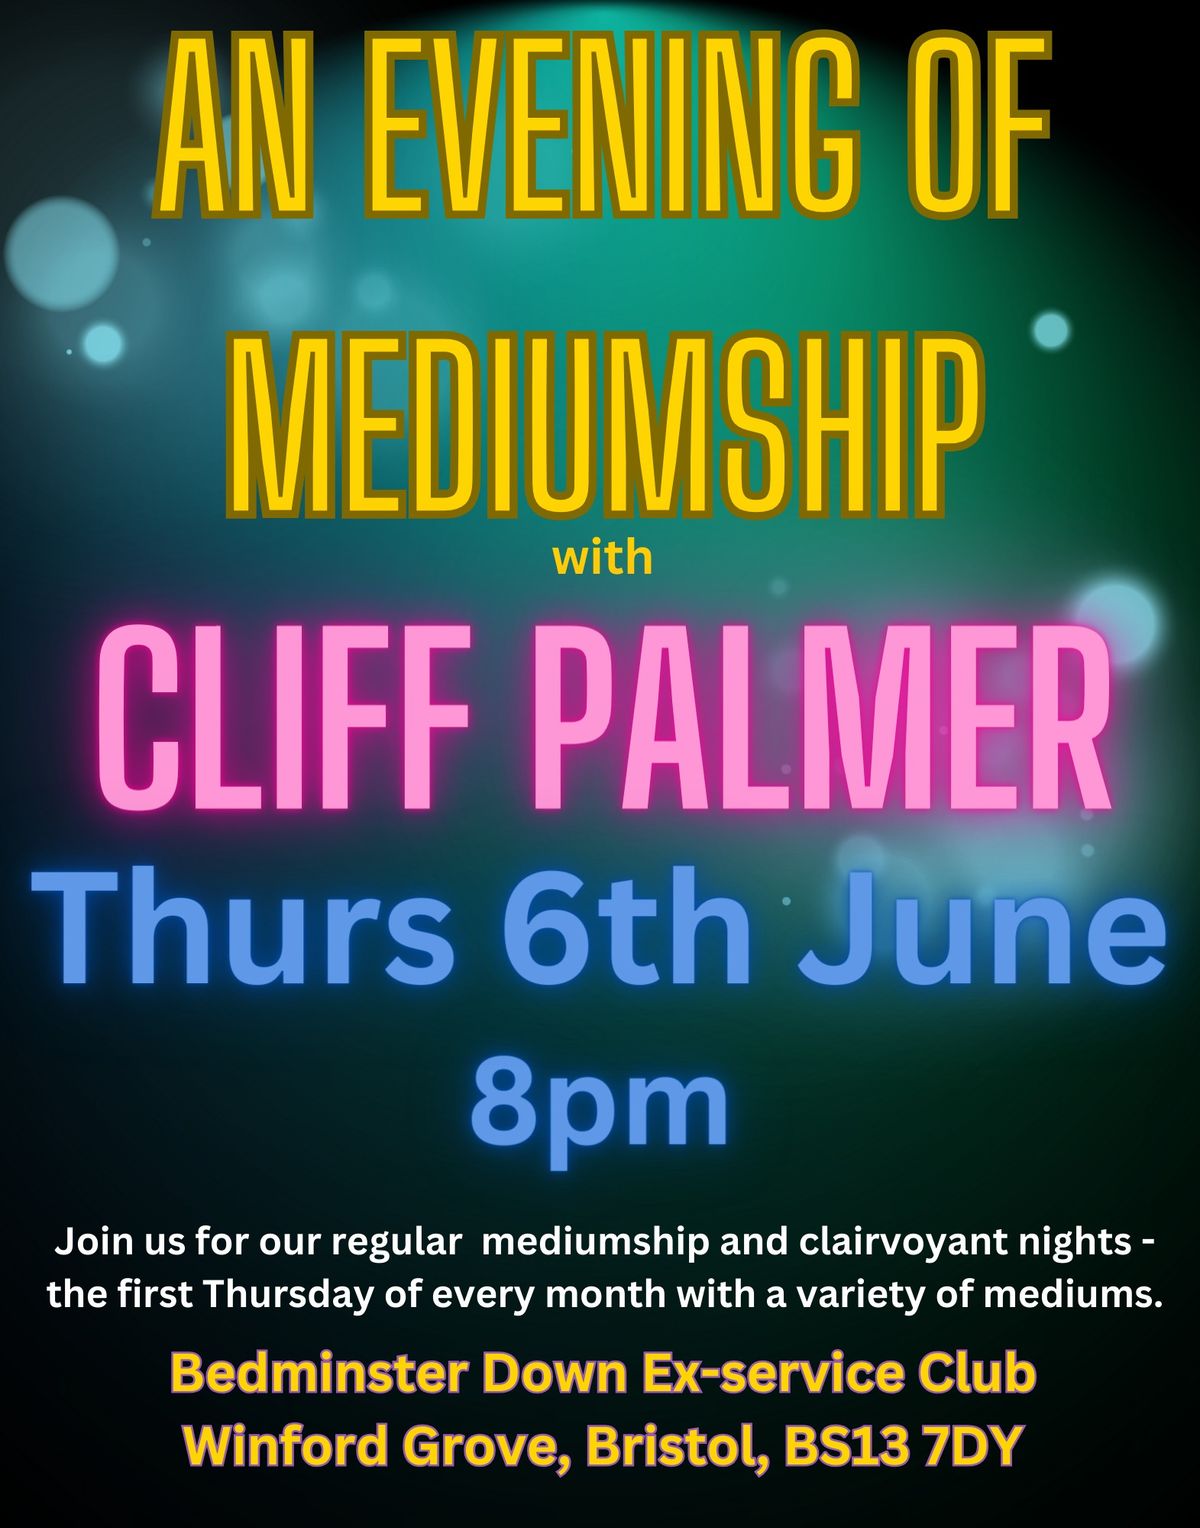 Evening of mediumship with Cliff Palmer